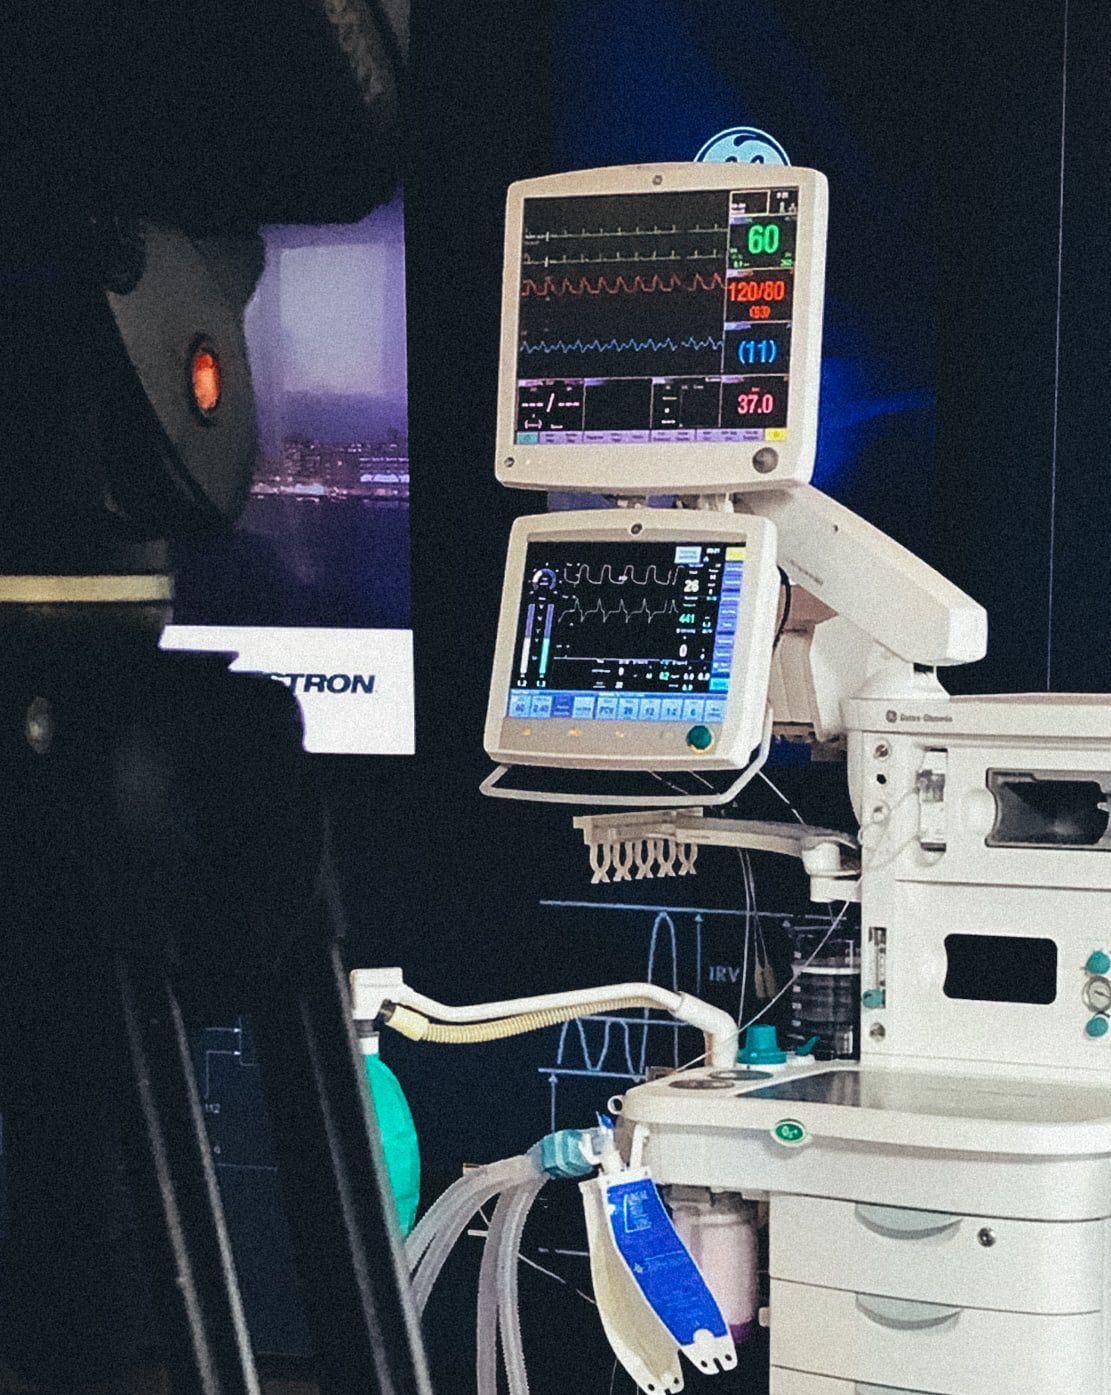 EPIC Creative helped GE Healthcare quickly develop training videos to support the use of their ventilators in the intensive care unit, to battle COVID-19.